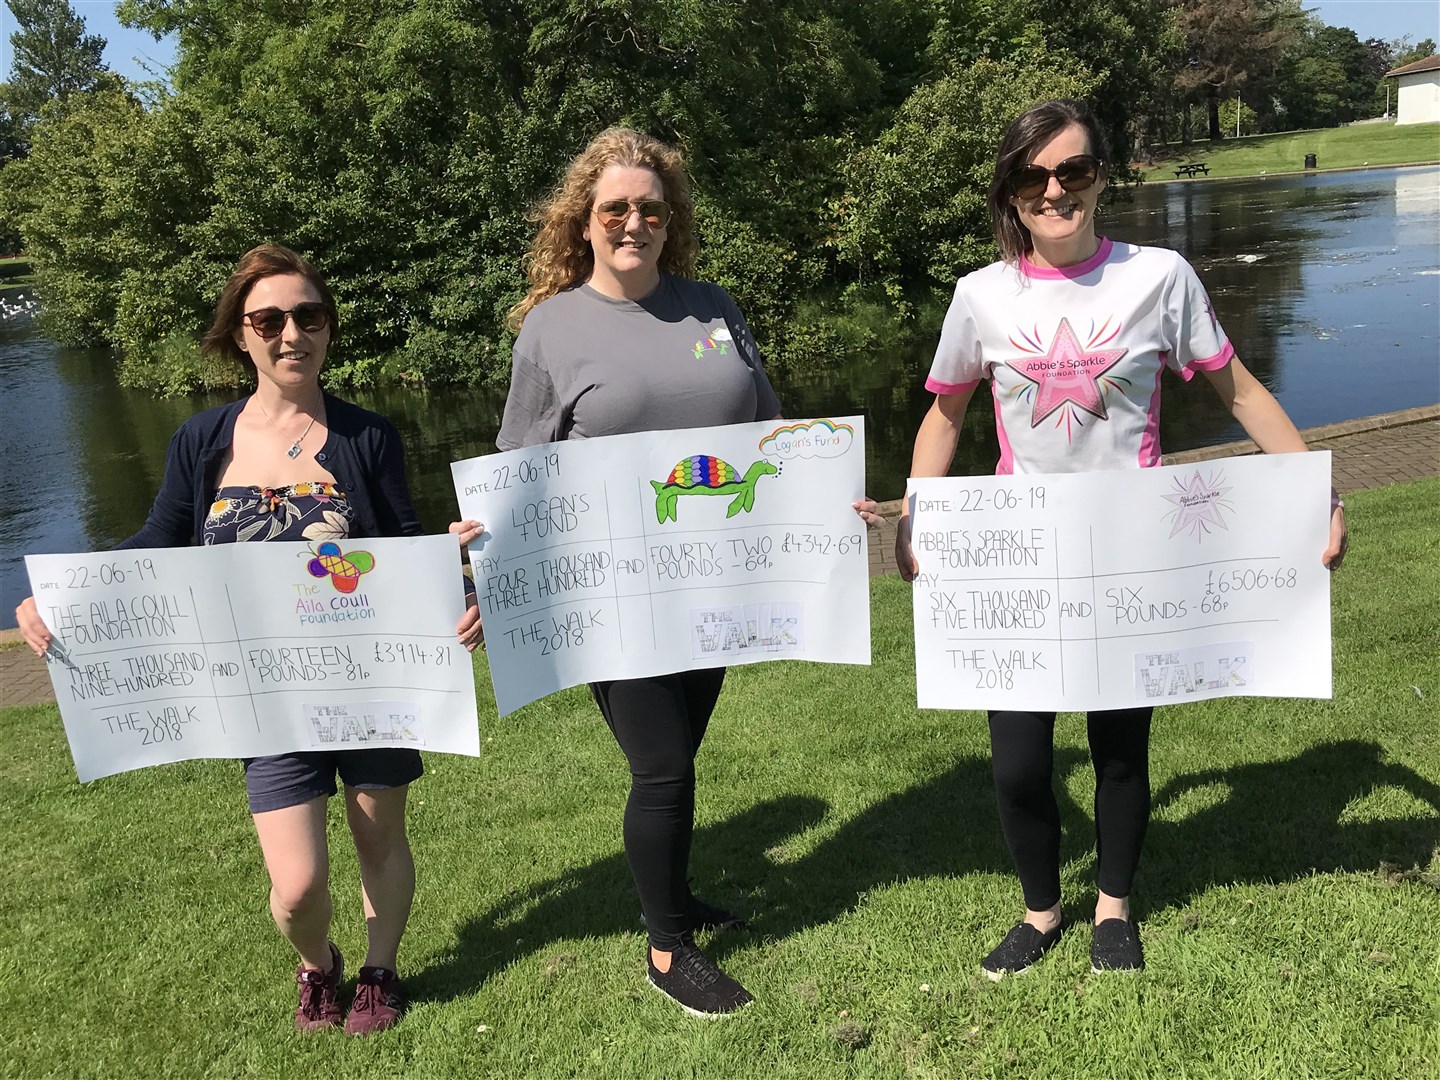 (From left) Sine Macdonald, Angela Main and Tammy Main, representing The Walk organising charities, the Aila Coull Foundation, Logan’s Fund and Abbie’s Sparkle Foundation.